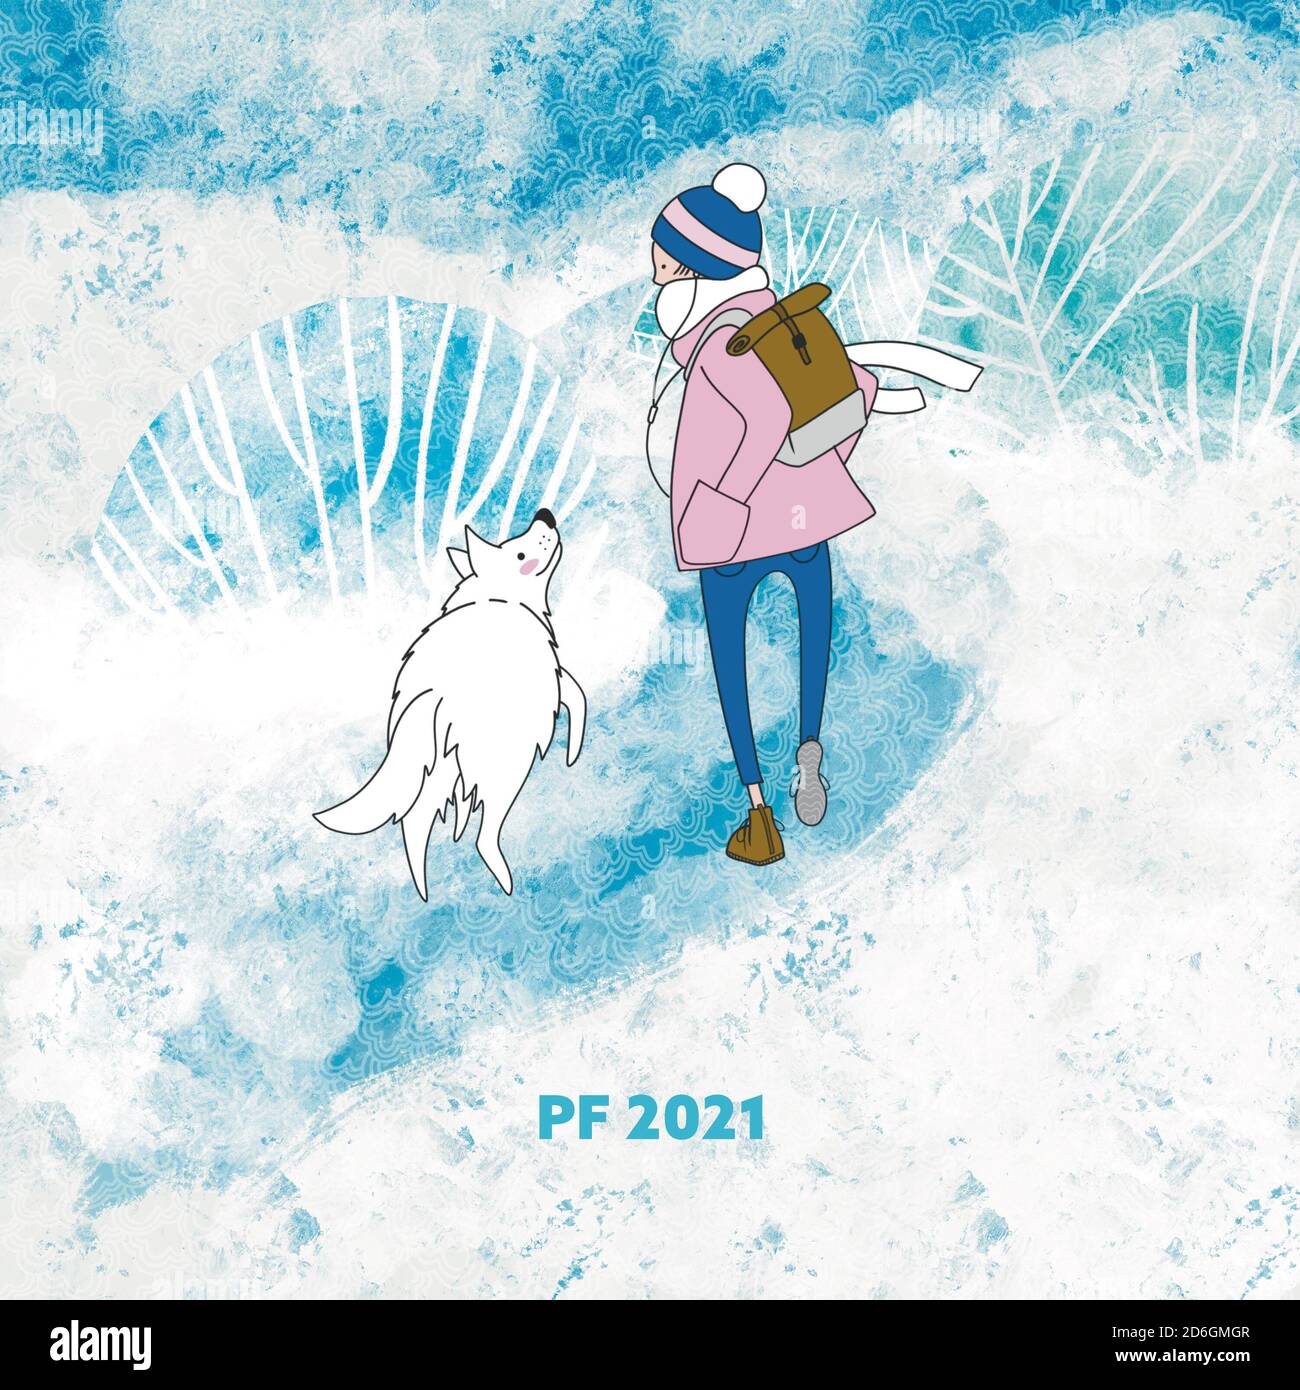 Greeting Card PF 2021. Girl with cute white dog on snow. Stock Photo